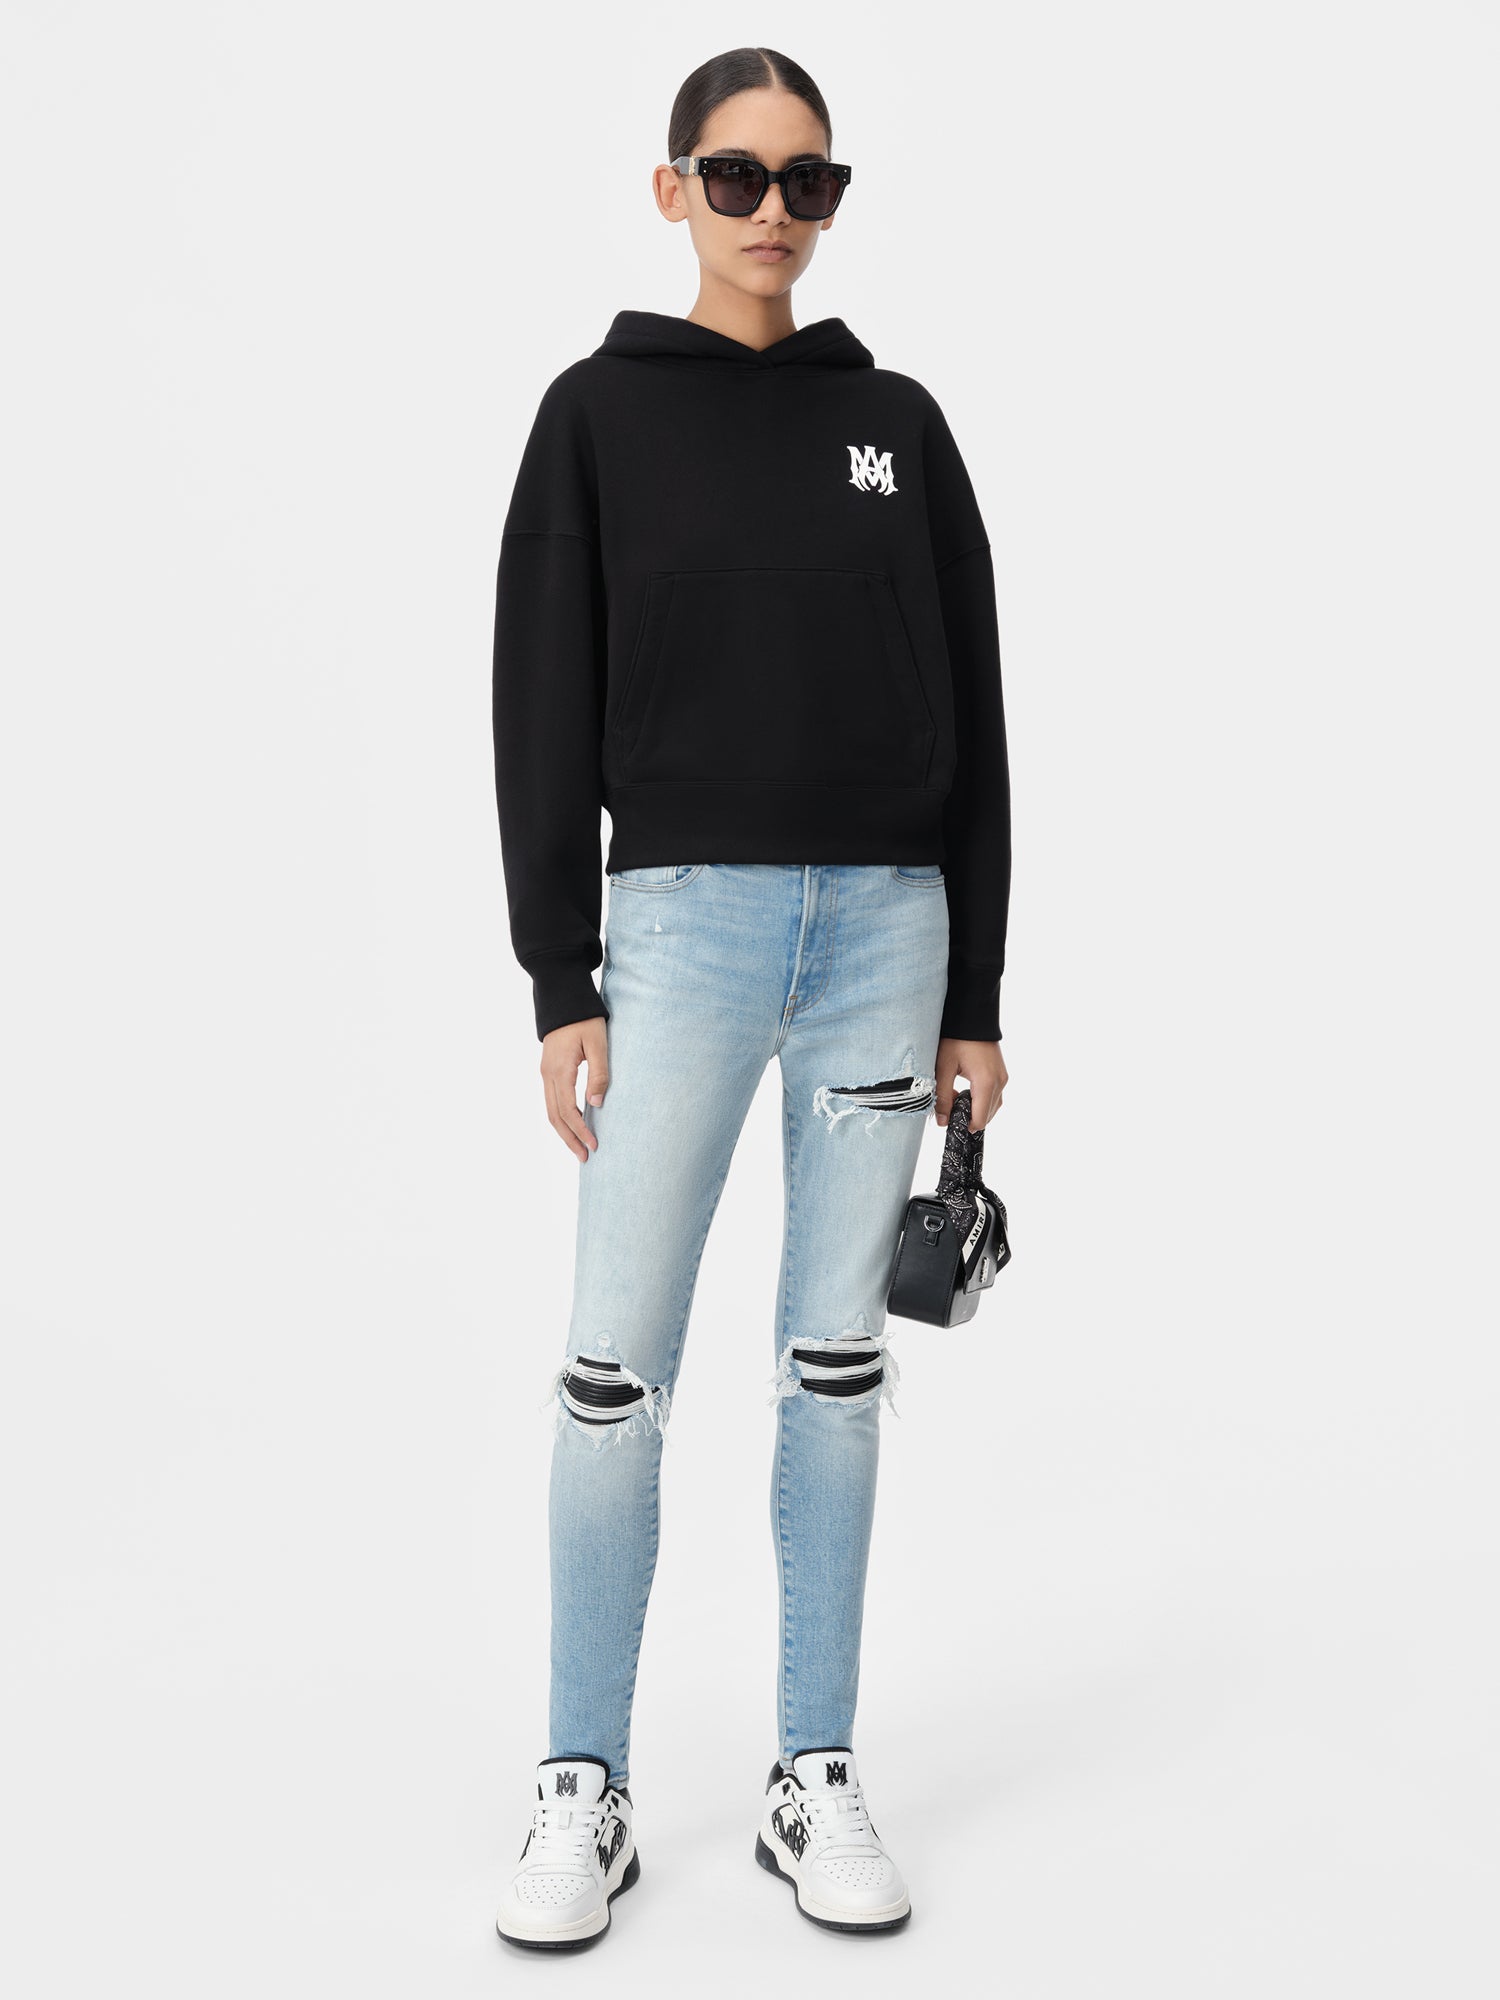 Product WOMEN - MA CORE LOGO HOODIE - Black featured image